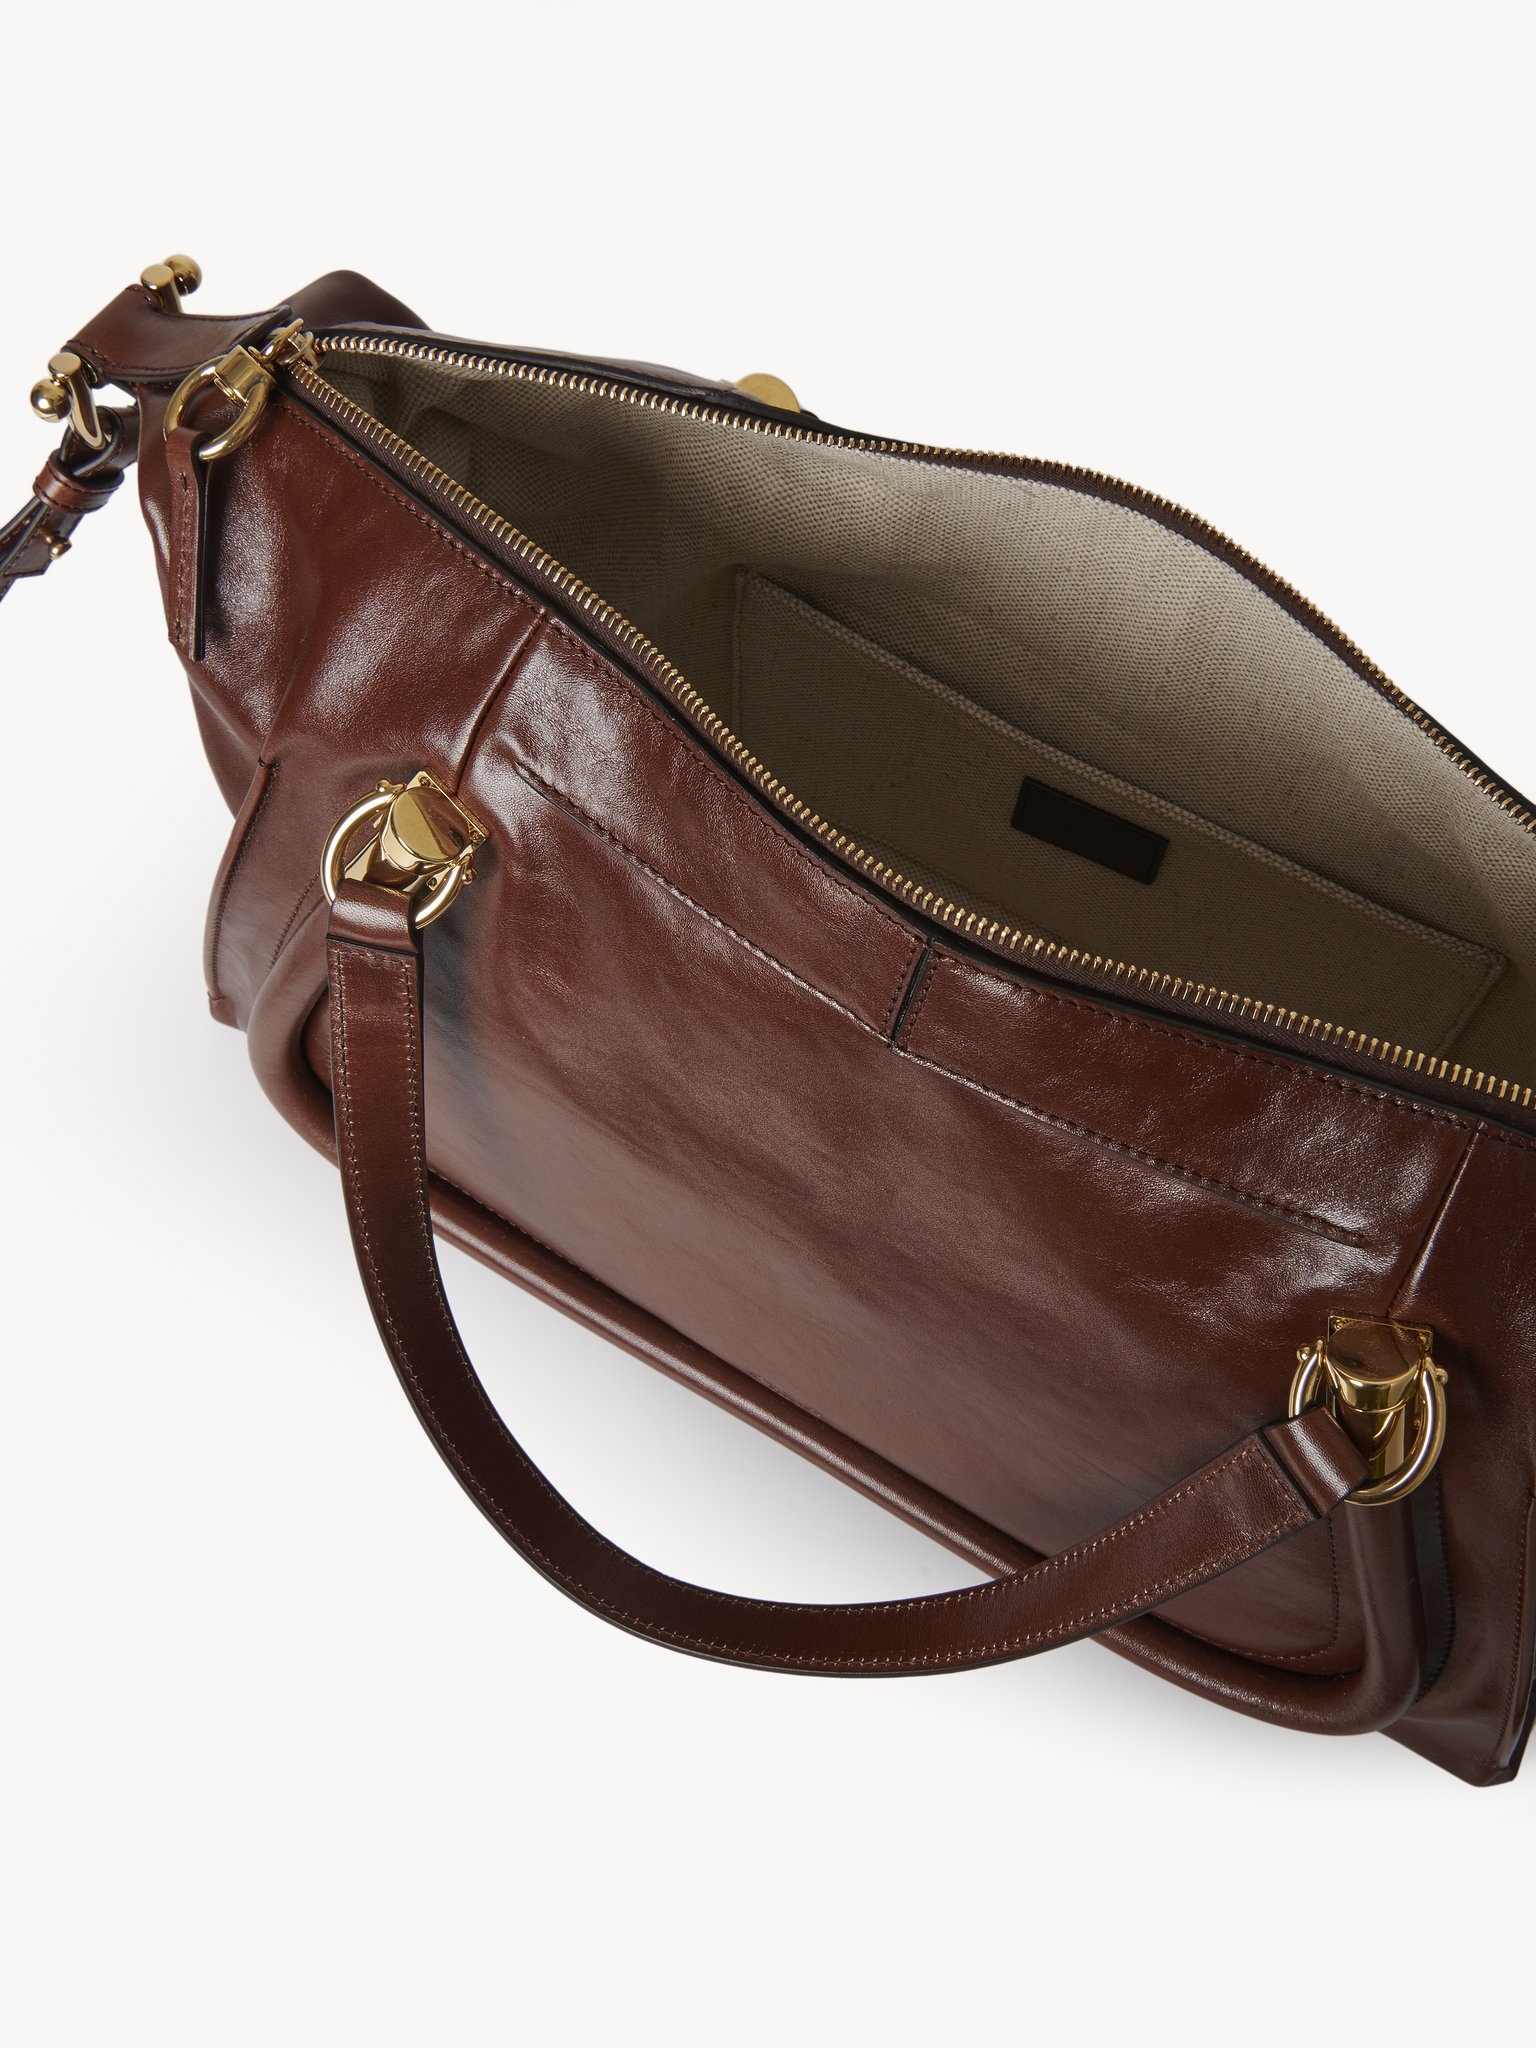 PARATY 24 BAG IN SOFT LEATHER - 6